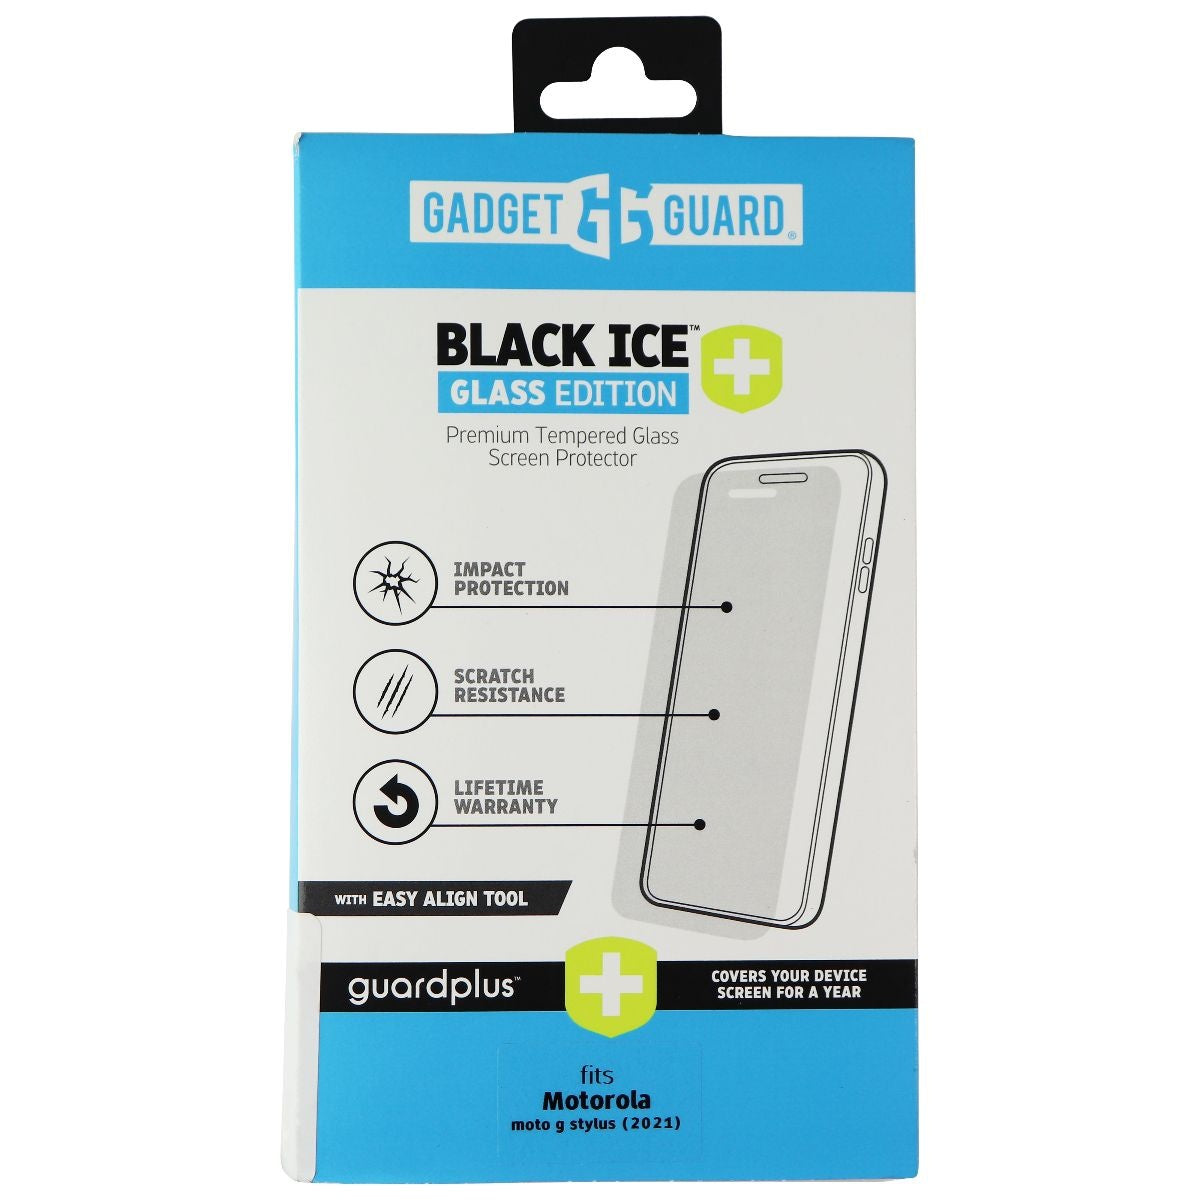 Gadget Guard Black Ice+ Glass Edition Screen Protector for Moto g stylus (2021) Cell Phone - Screen Protectors Gadget Guard    - Simple Cell Bulk Wholesale Pricing - USA Seller